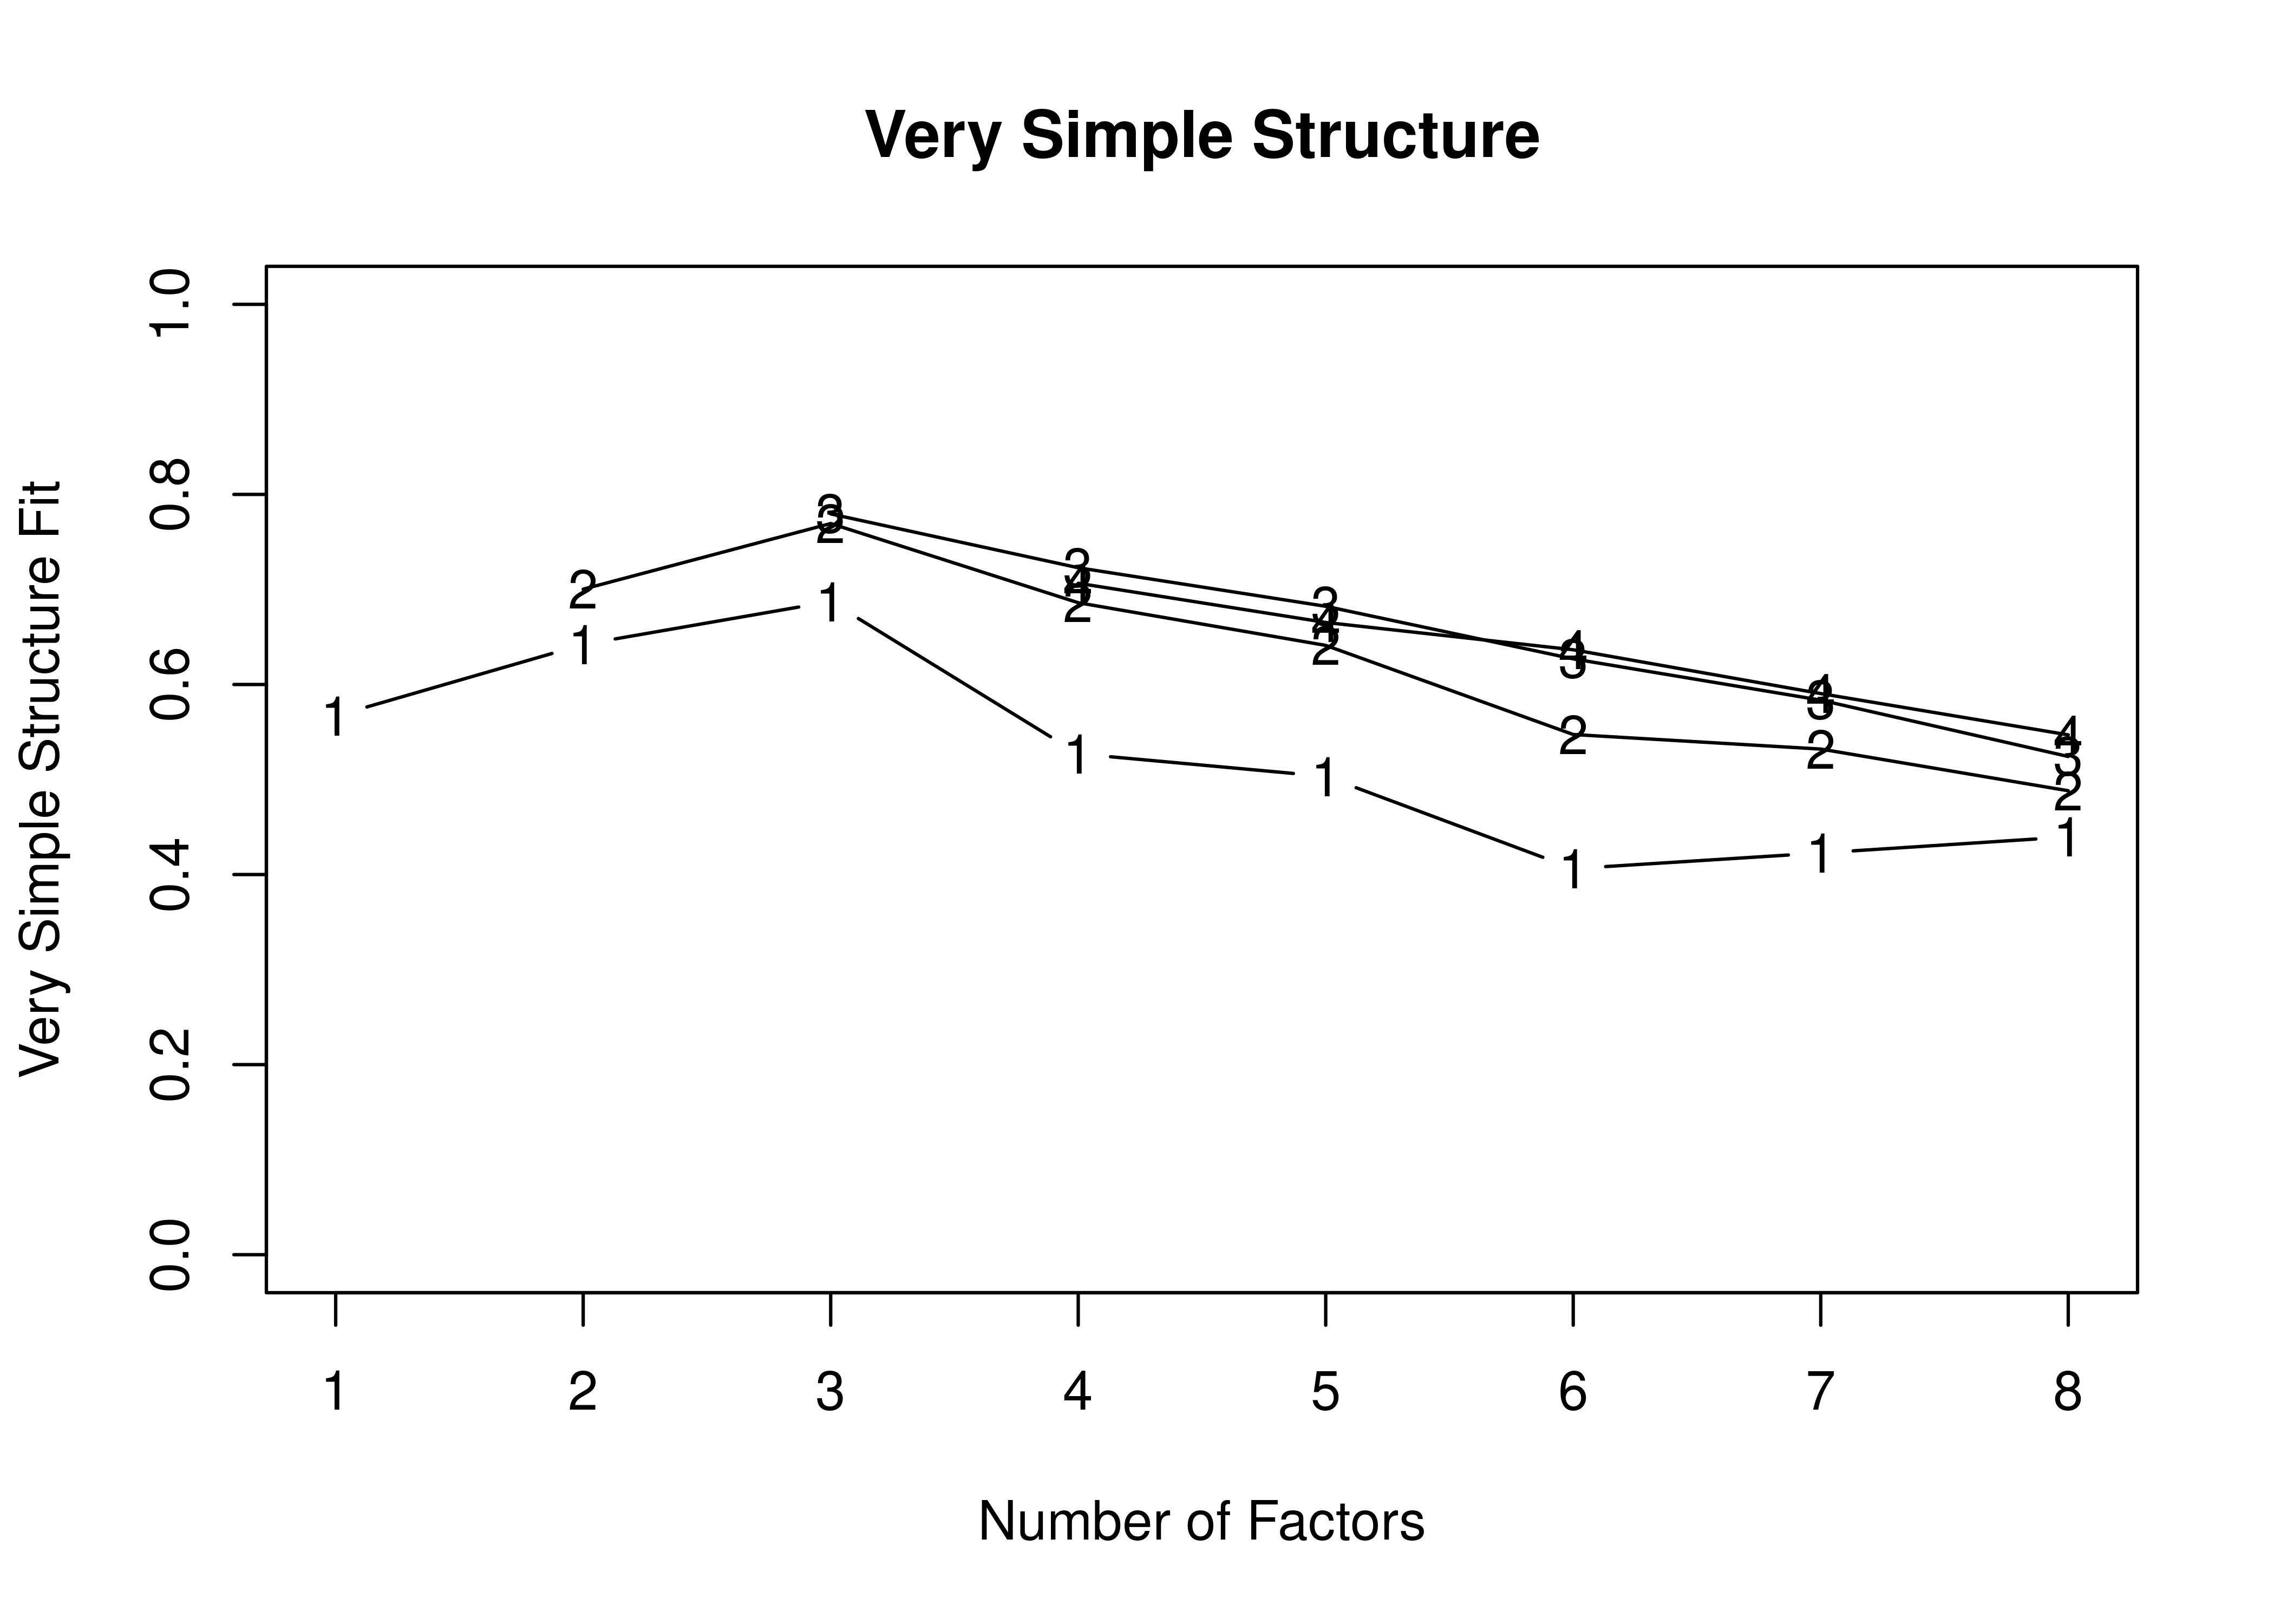 Very Simple Structure Plot With Oblique Rotation in Exploratory Factor Analysis.